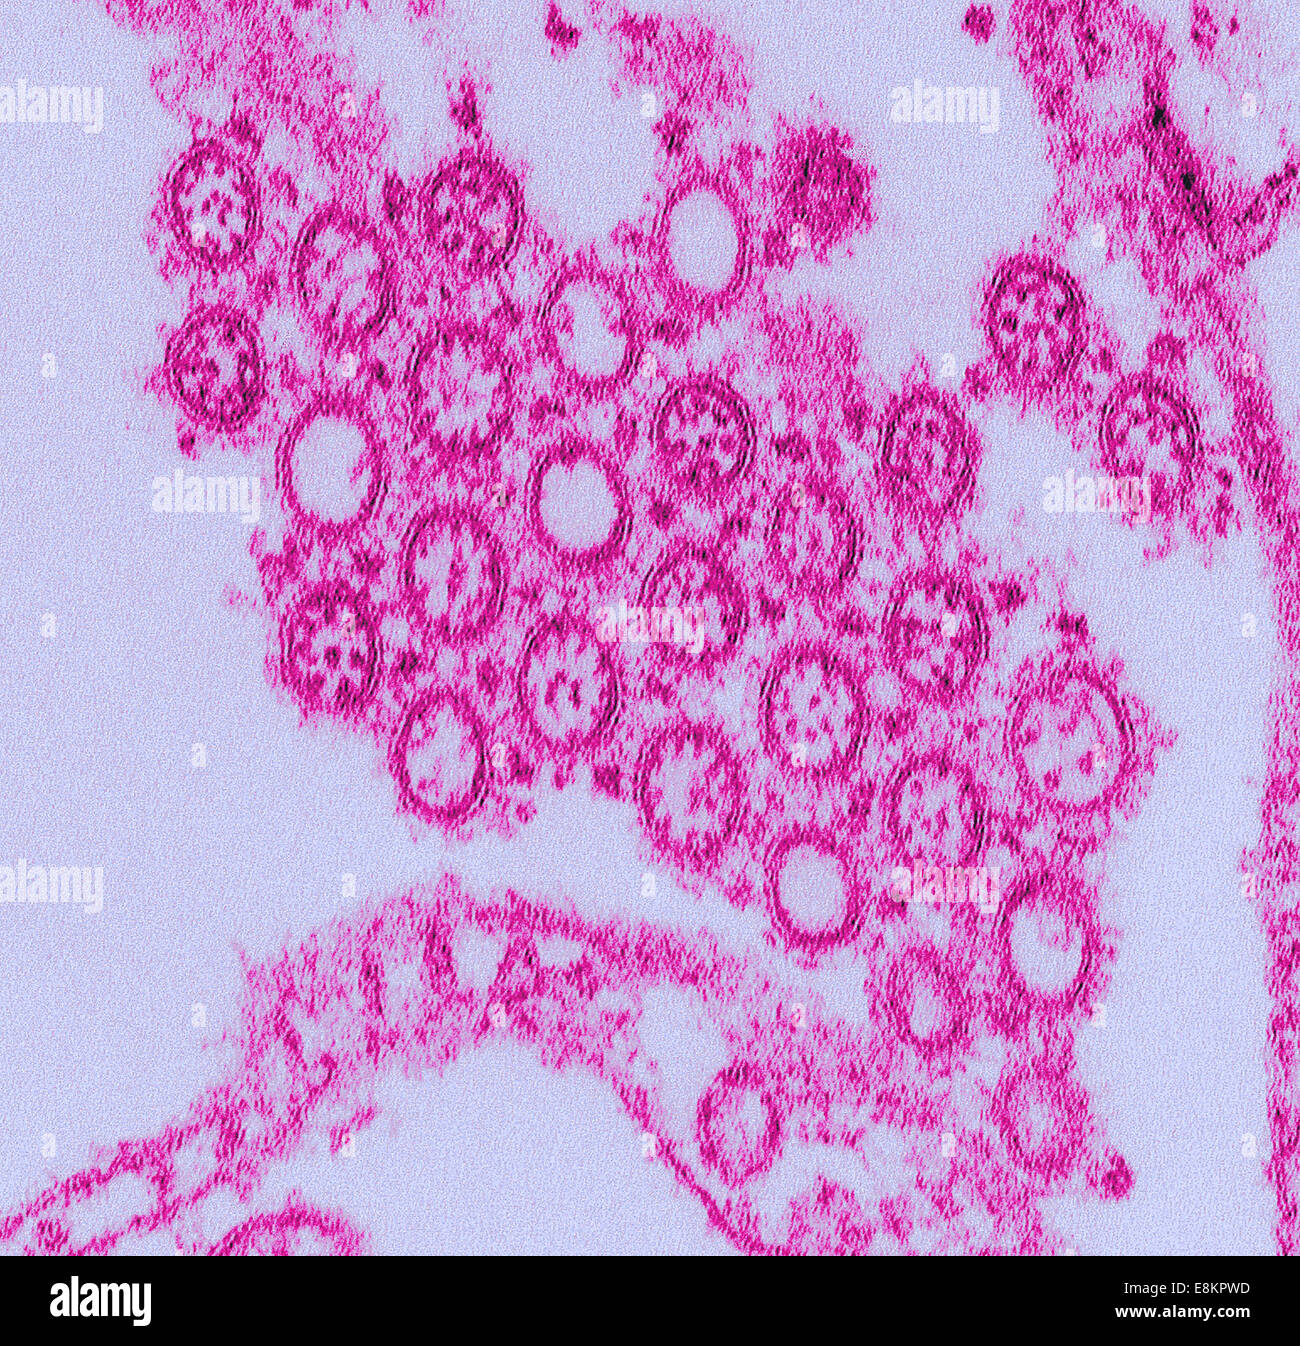 This highly-magnified, digitally-colorized transmission electron micrograph (TEM) depicted numbers of virions from Novel Flu Stock Photo